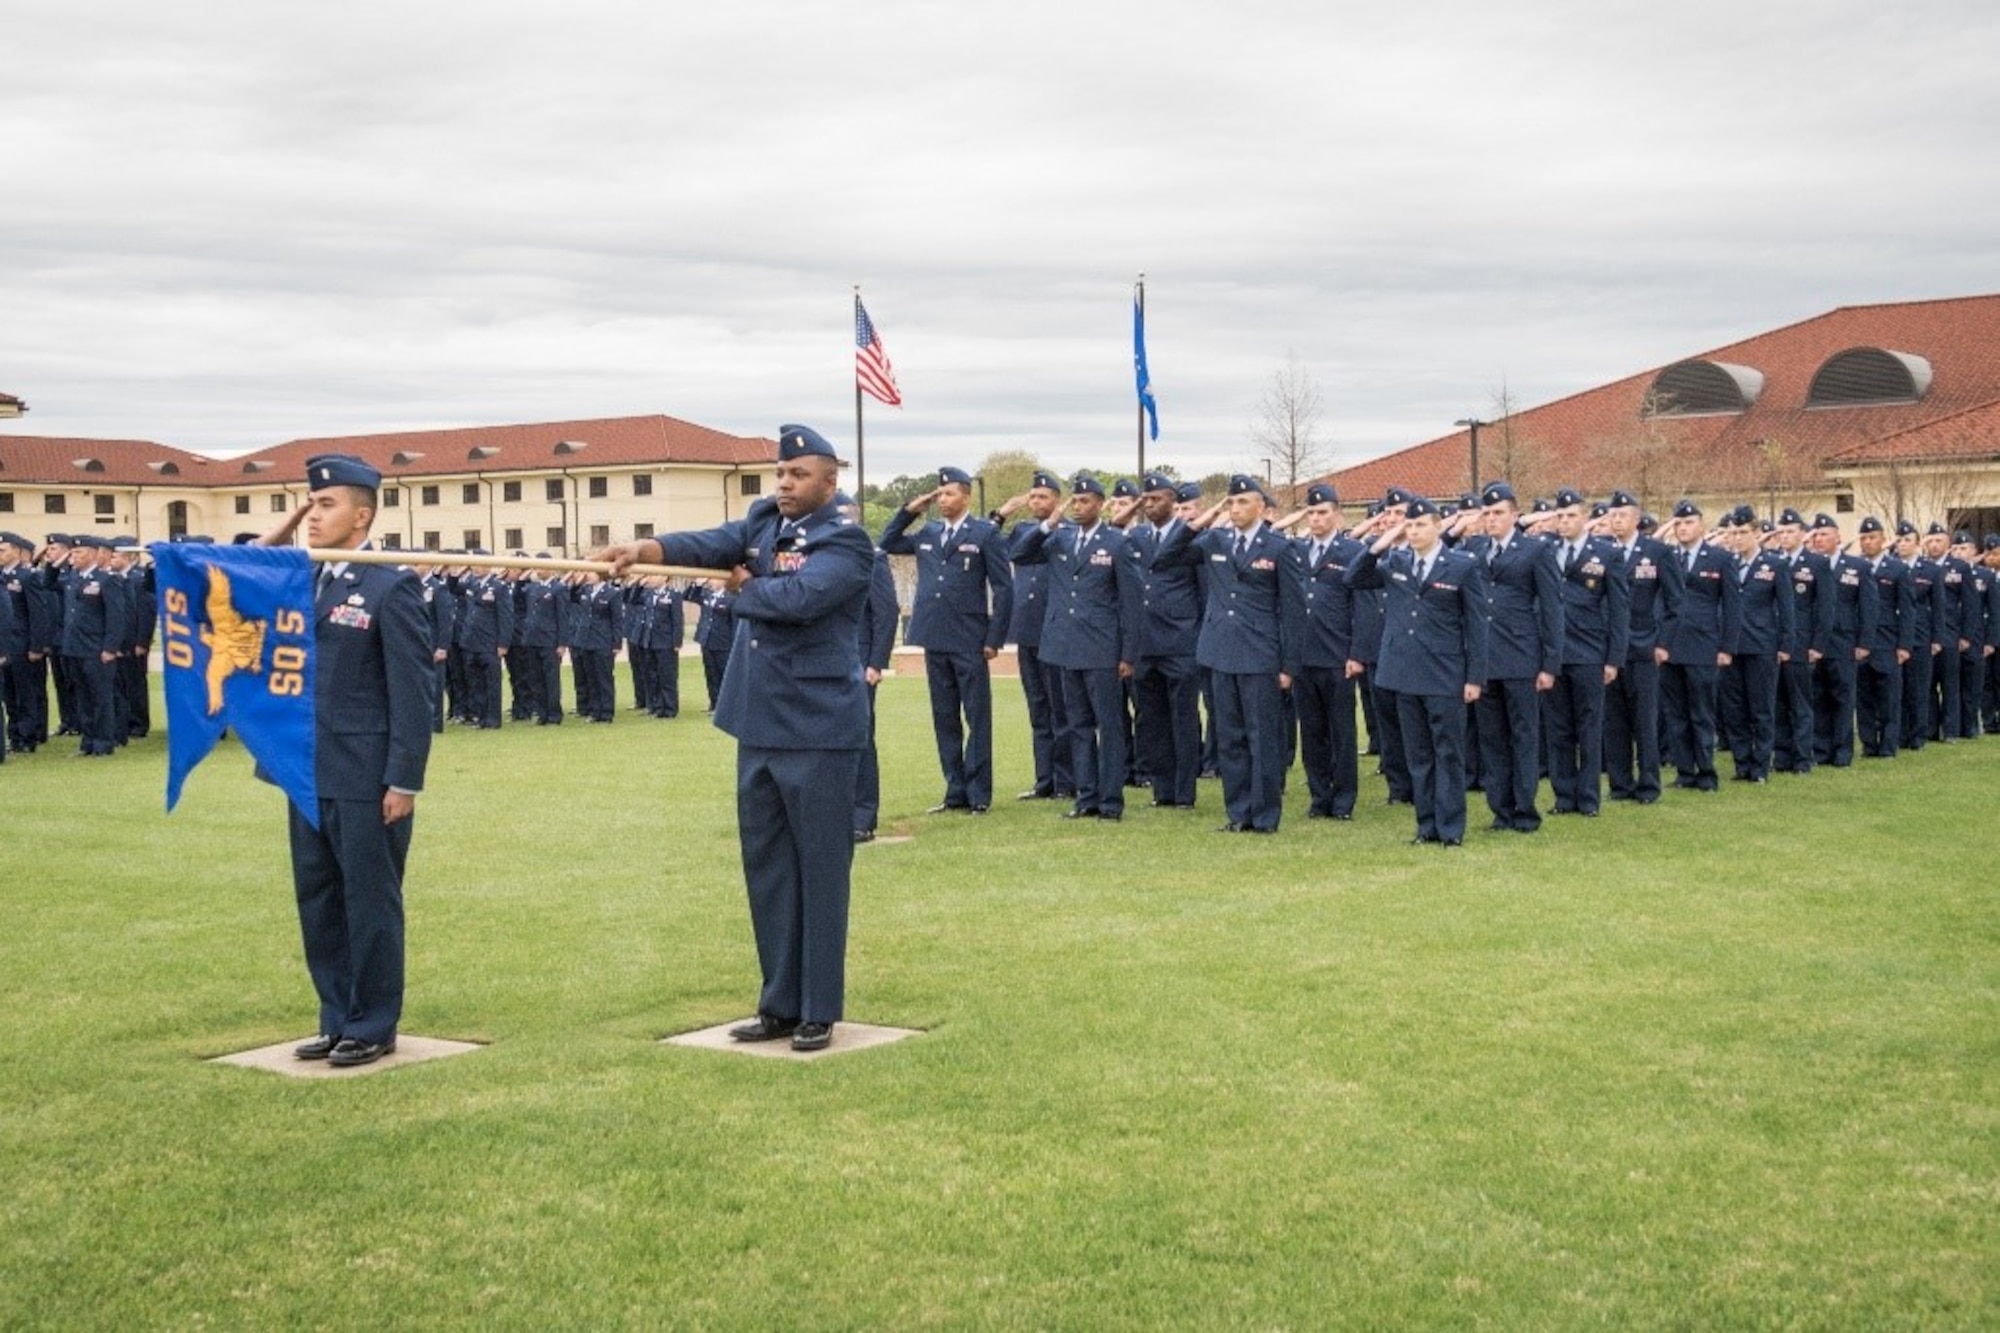 Air Force Officer Training School officer trainees salute during the ceremonial playing of ‘Ruffles and Flourishes,’ March 15, 2019, Maxwell Air Force Base, Alabama. This graduating class of officers is the largest ever and one of the first under the new consolidated OTS training program. (U.S. Air Force photo by Airman First Class Matthew Markivee)